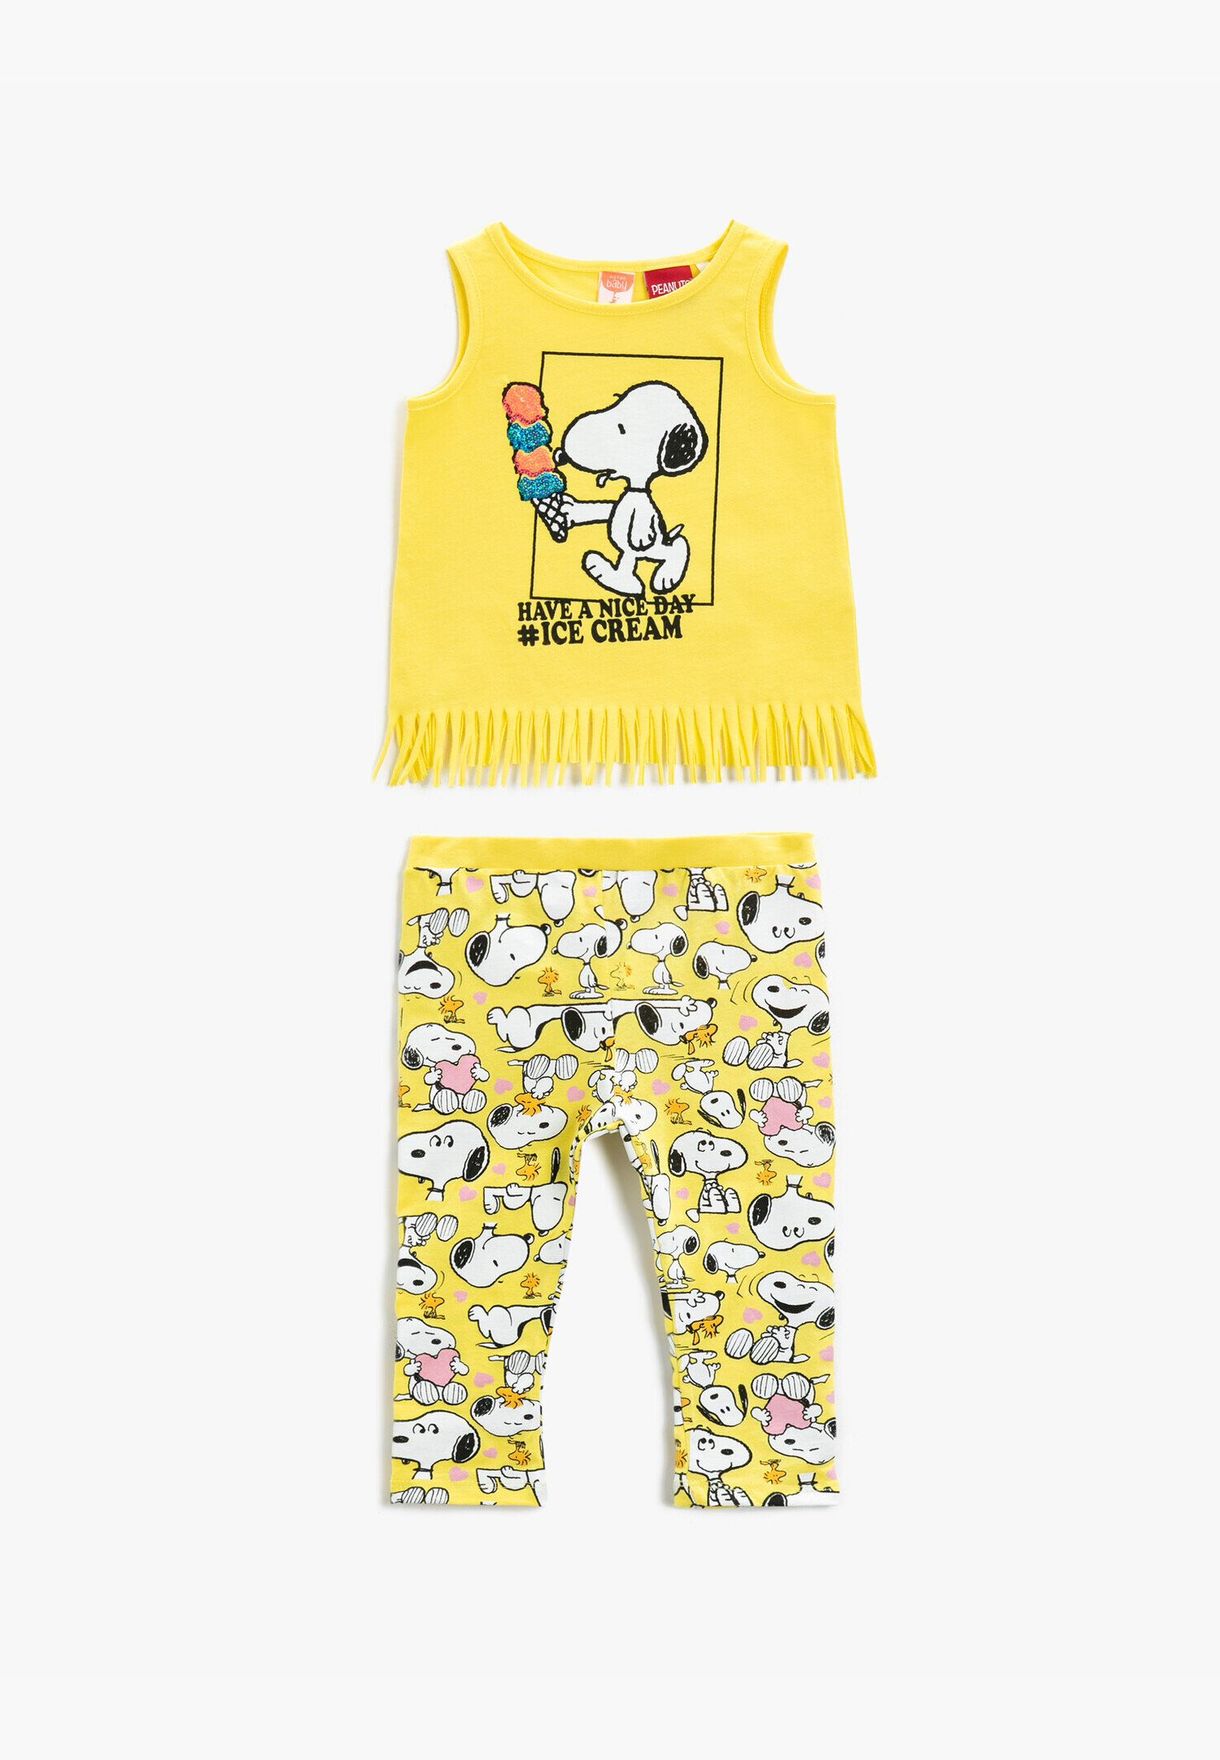 Snoopy Tank Top Cotton Fringed Licensed Printed